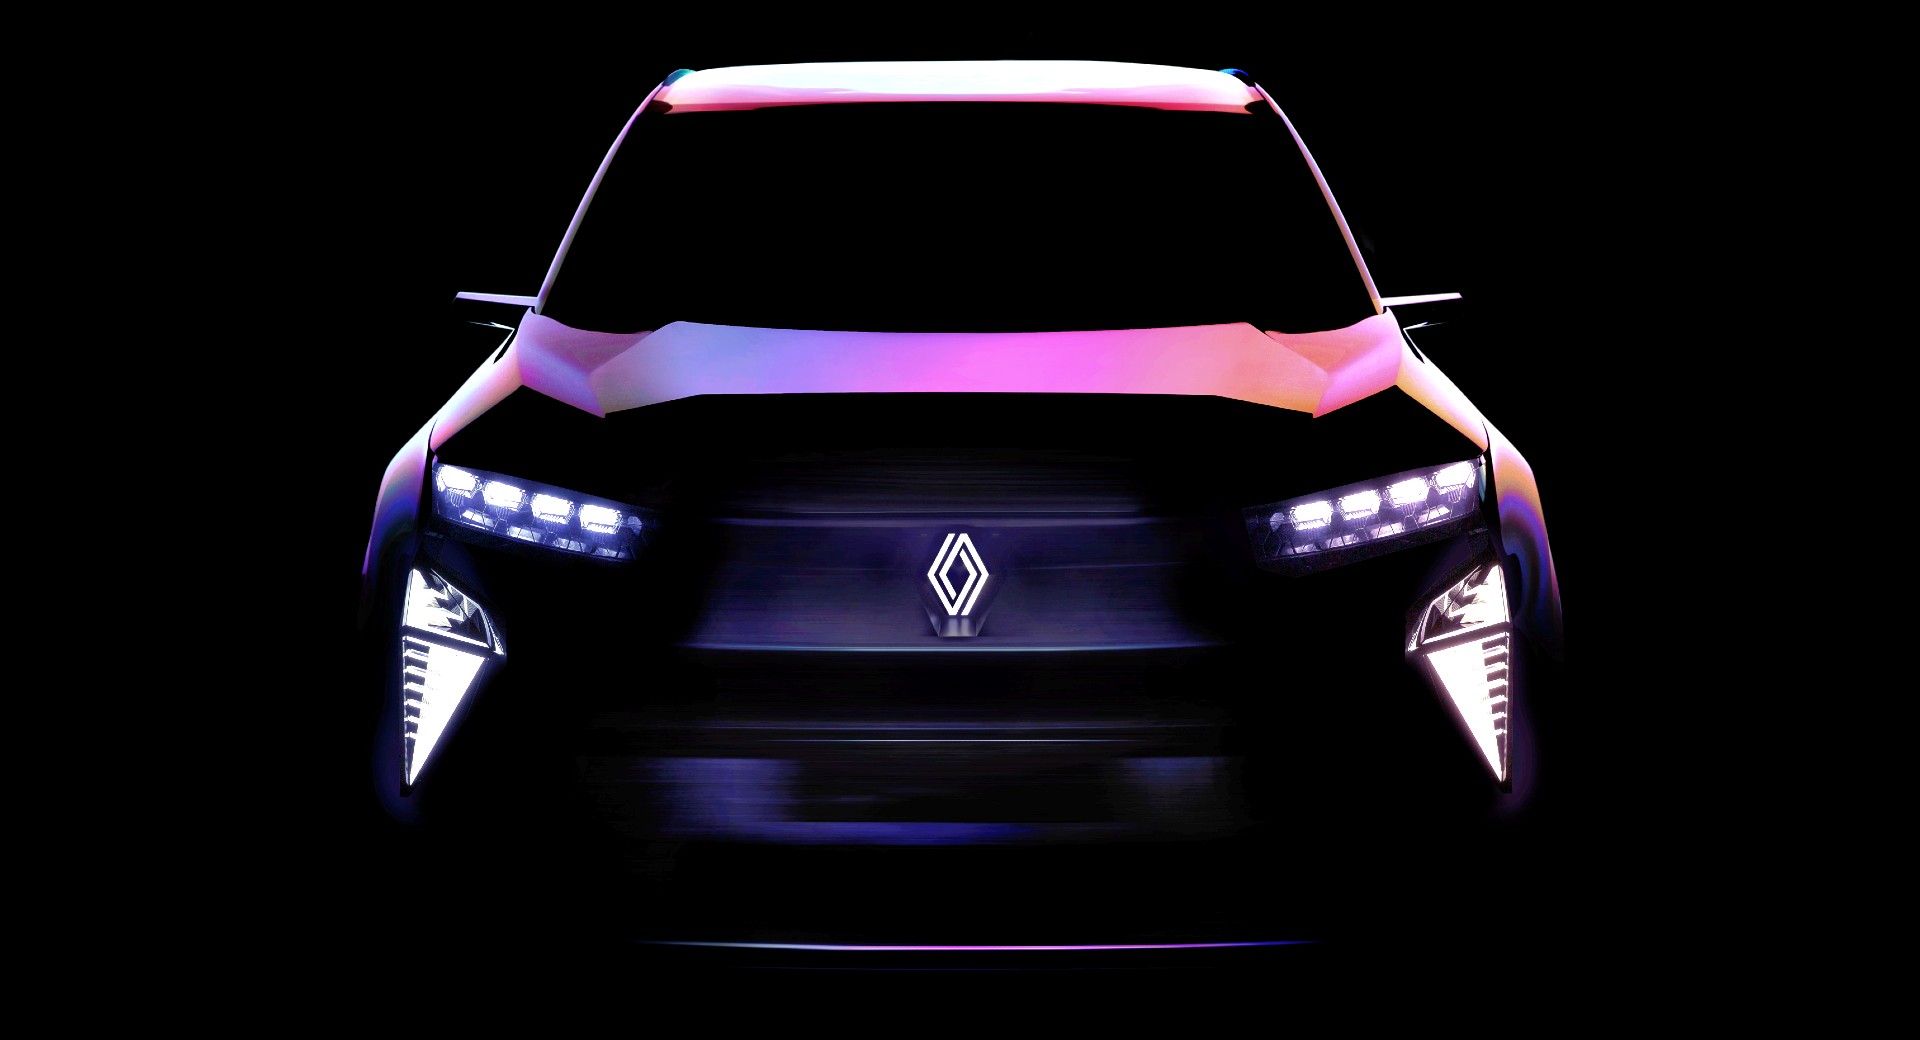 Renault Teases A New Hydrogen-Powered Concept, Will Debut In